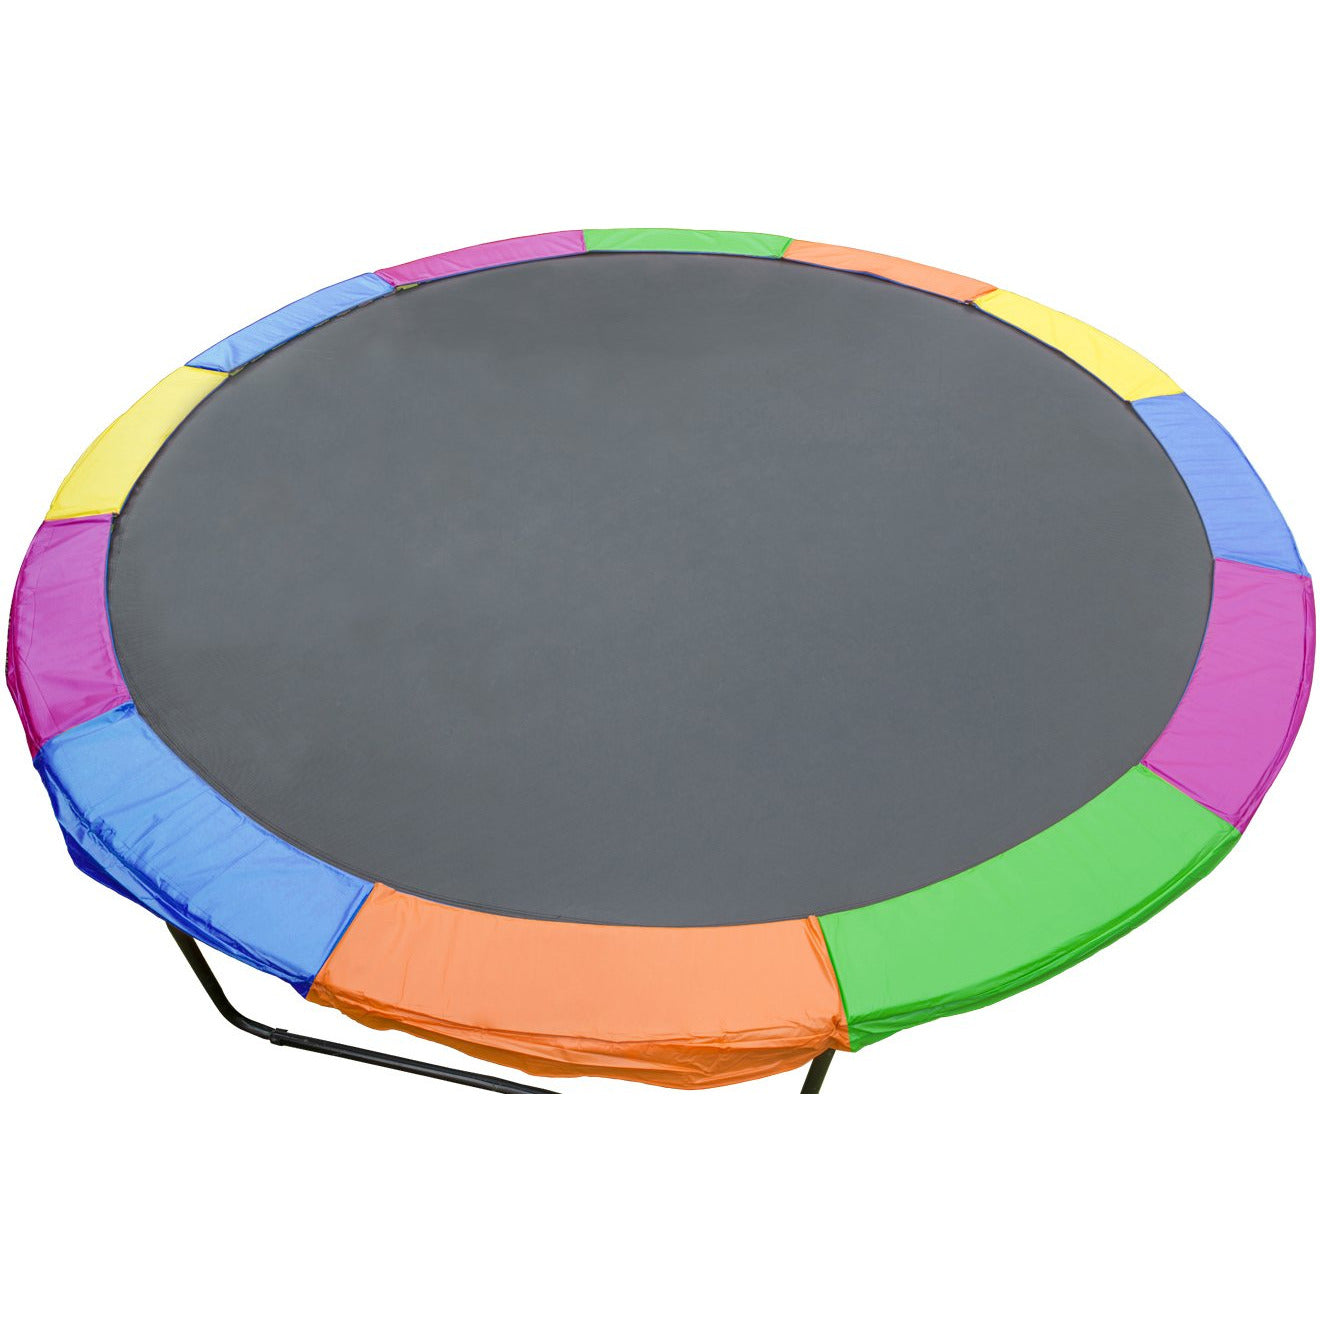 Replacement Trampoline Pad Reinforced Outdoor Round Spring Cover 14ft